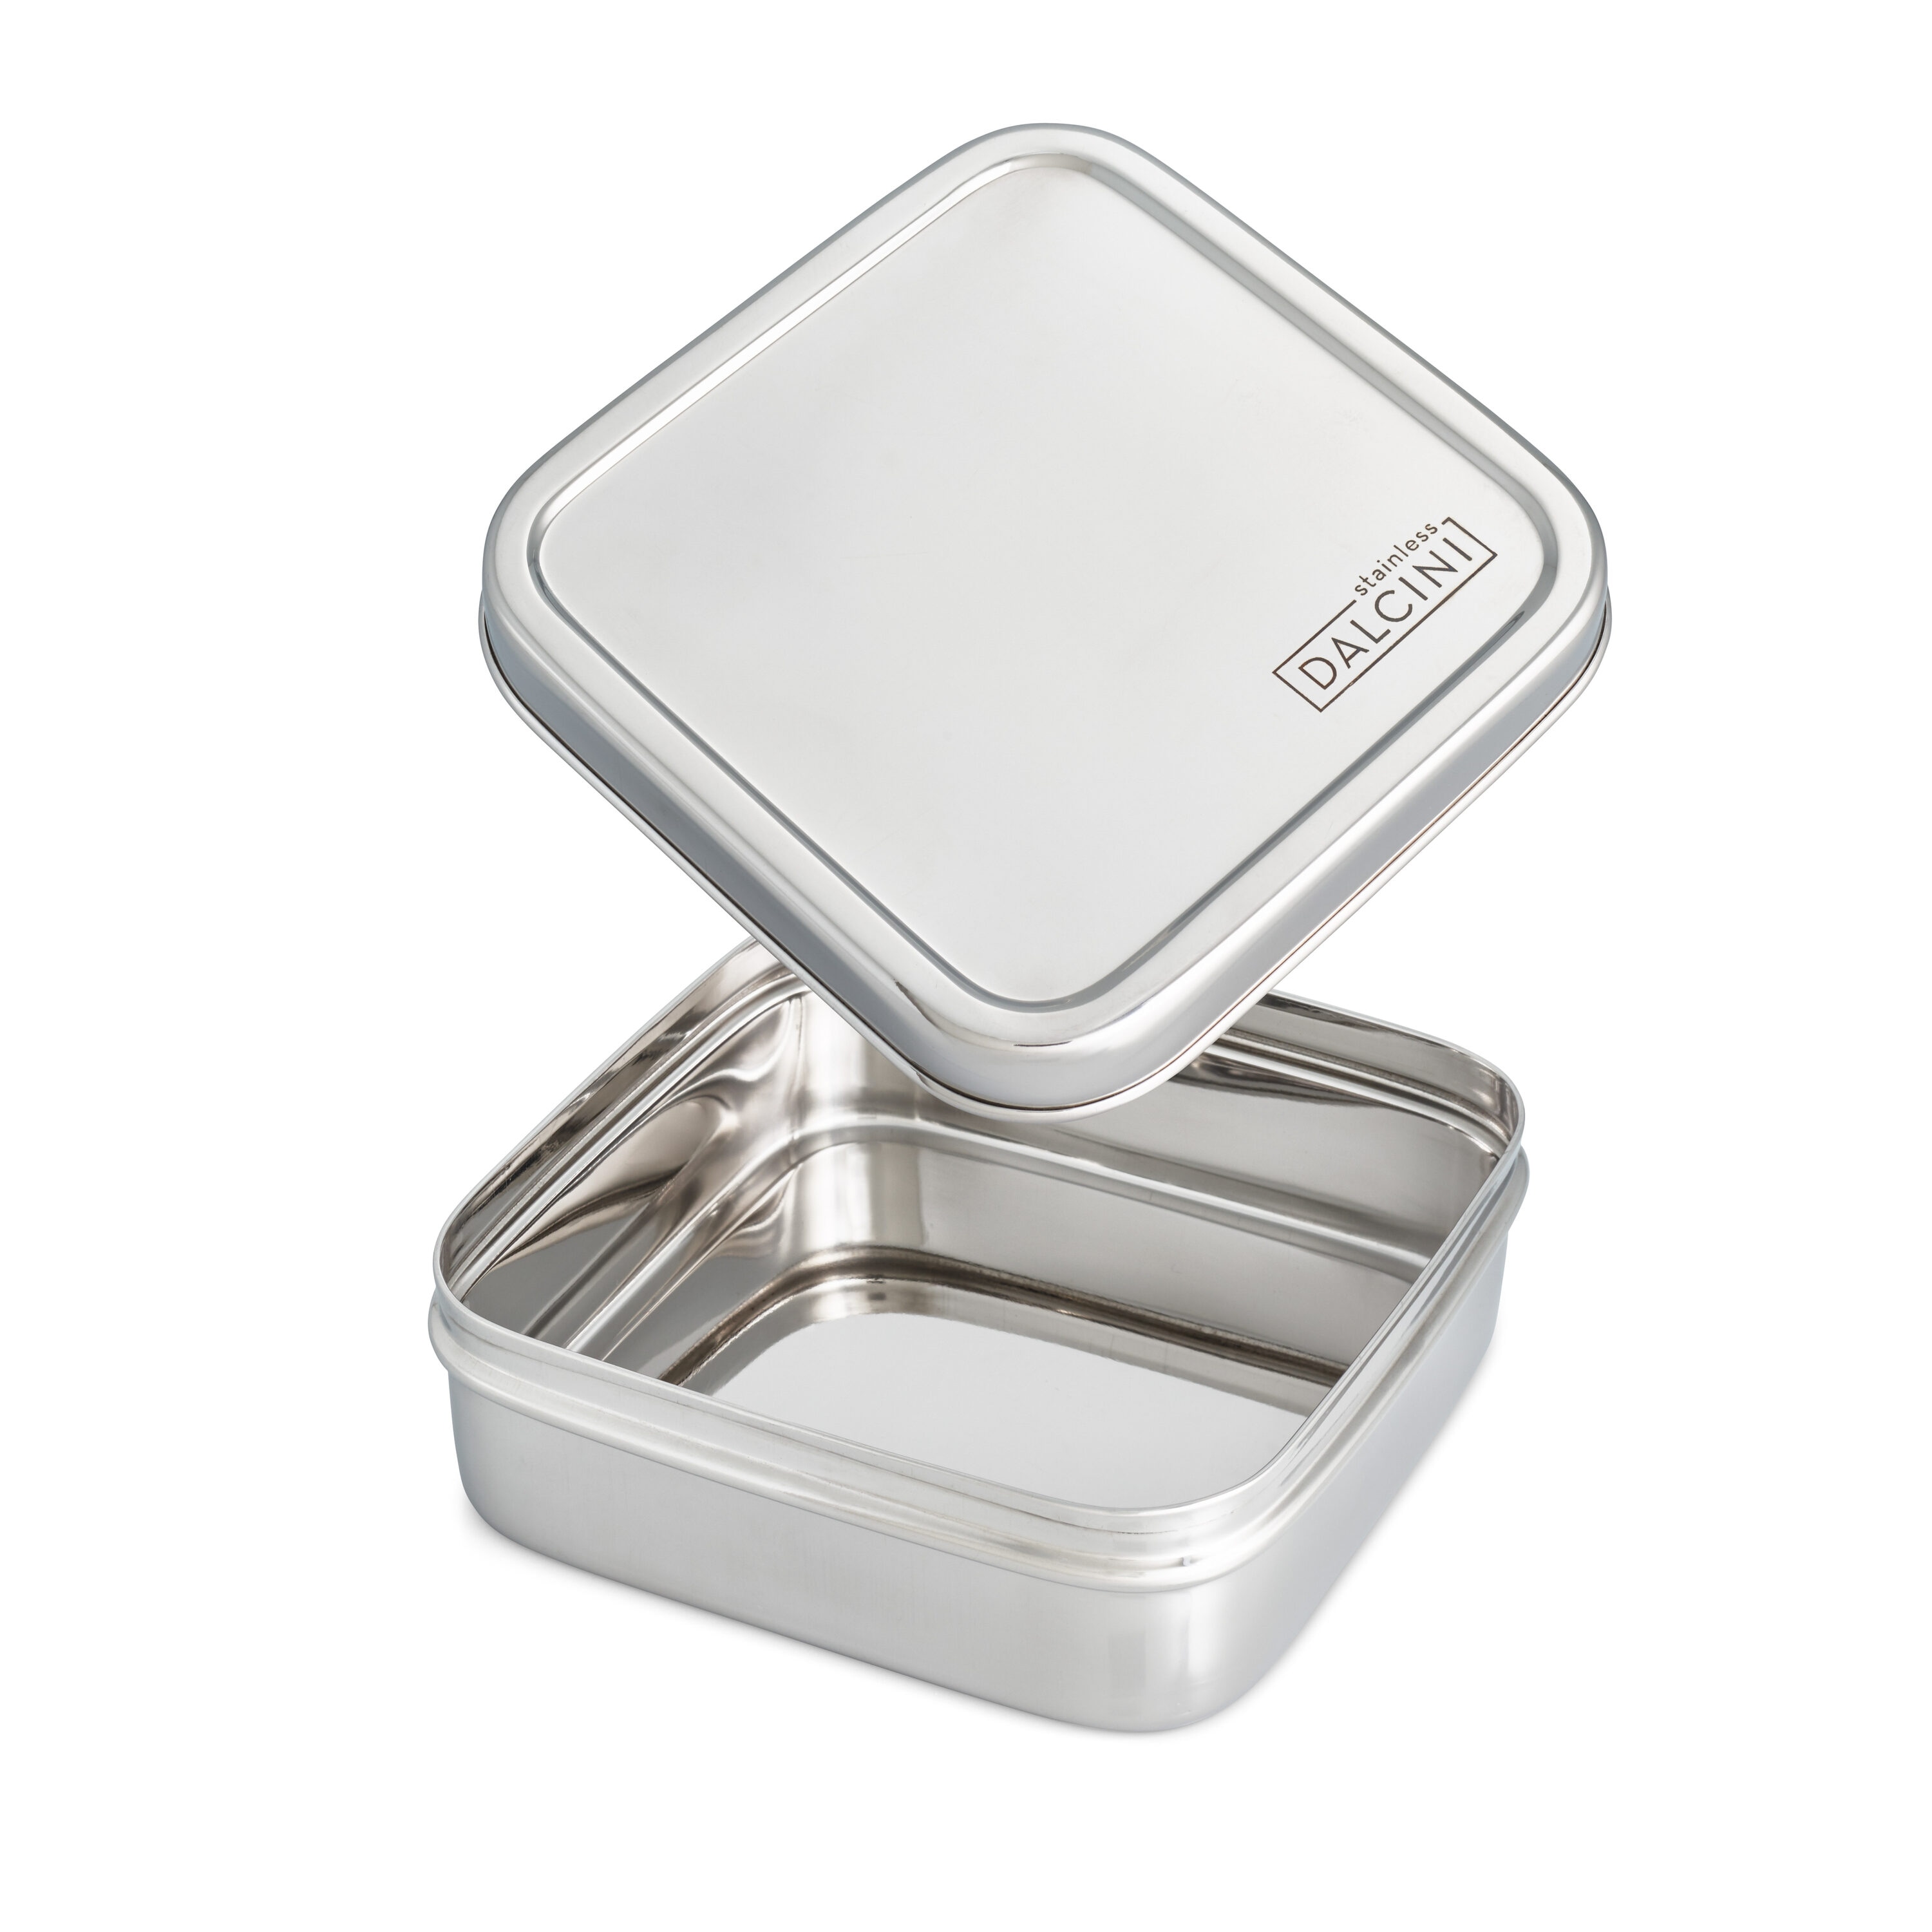 DALCINI Quart Stainless Steel Bpa-free Reusable Bento Box Set with Lid in  the Food Storage Containers department at